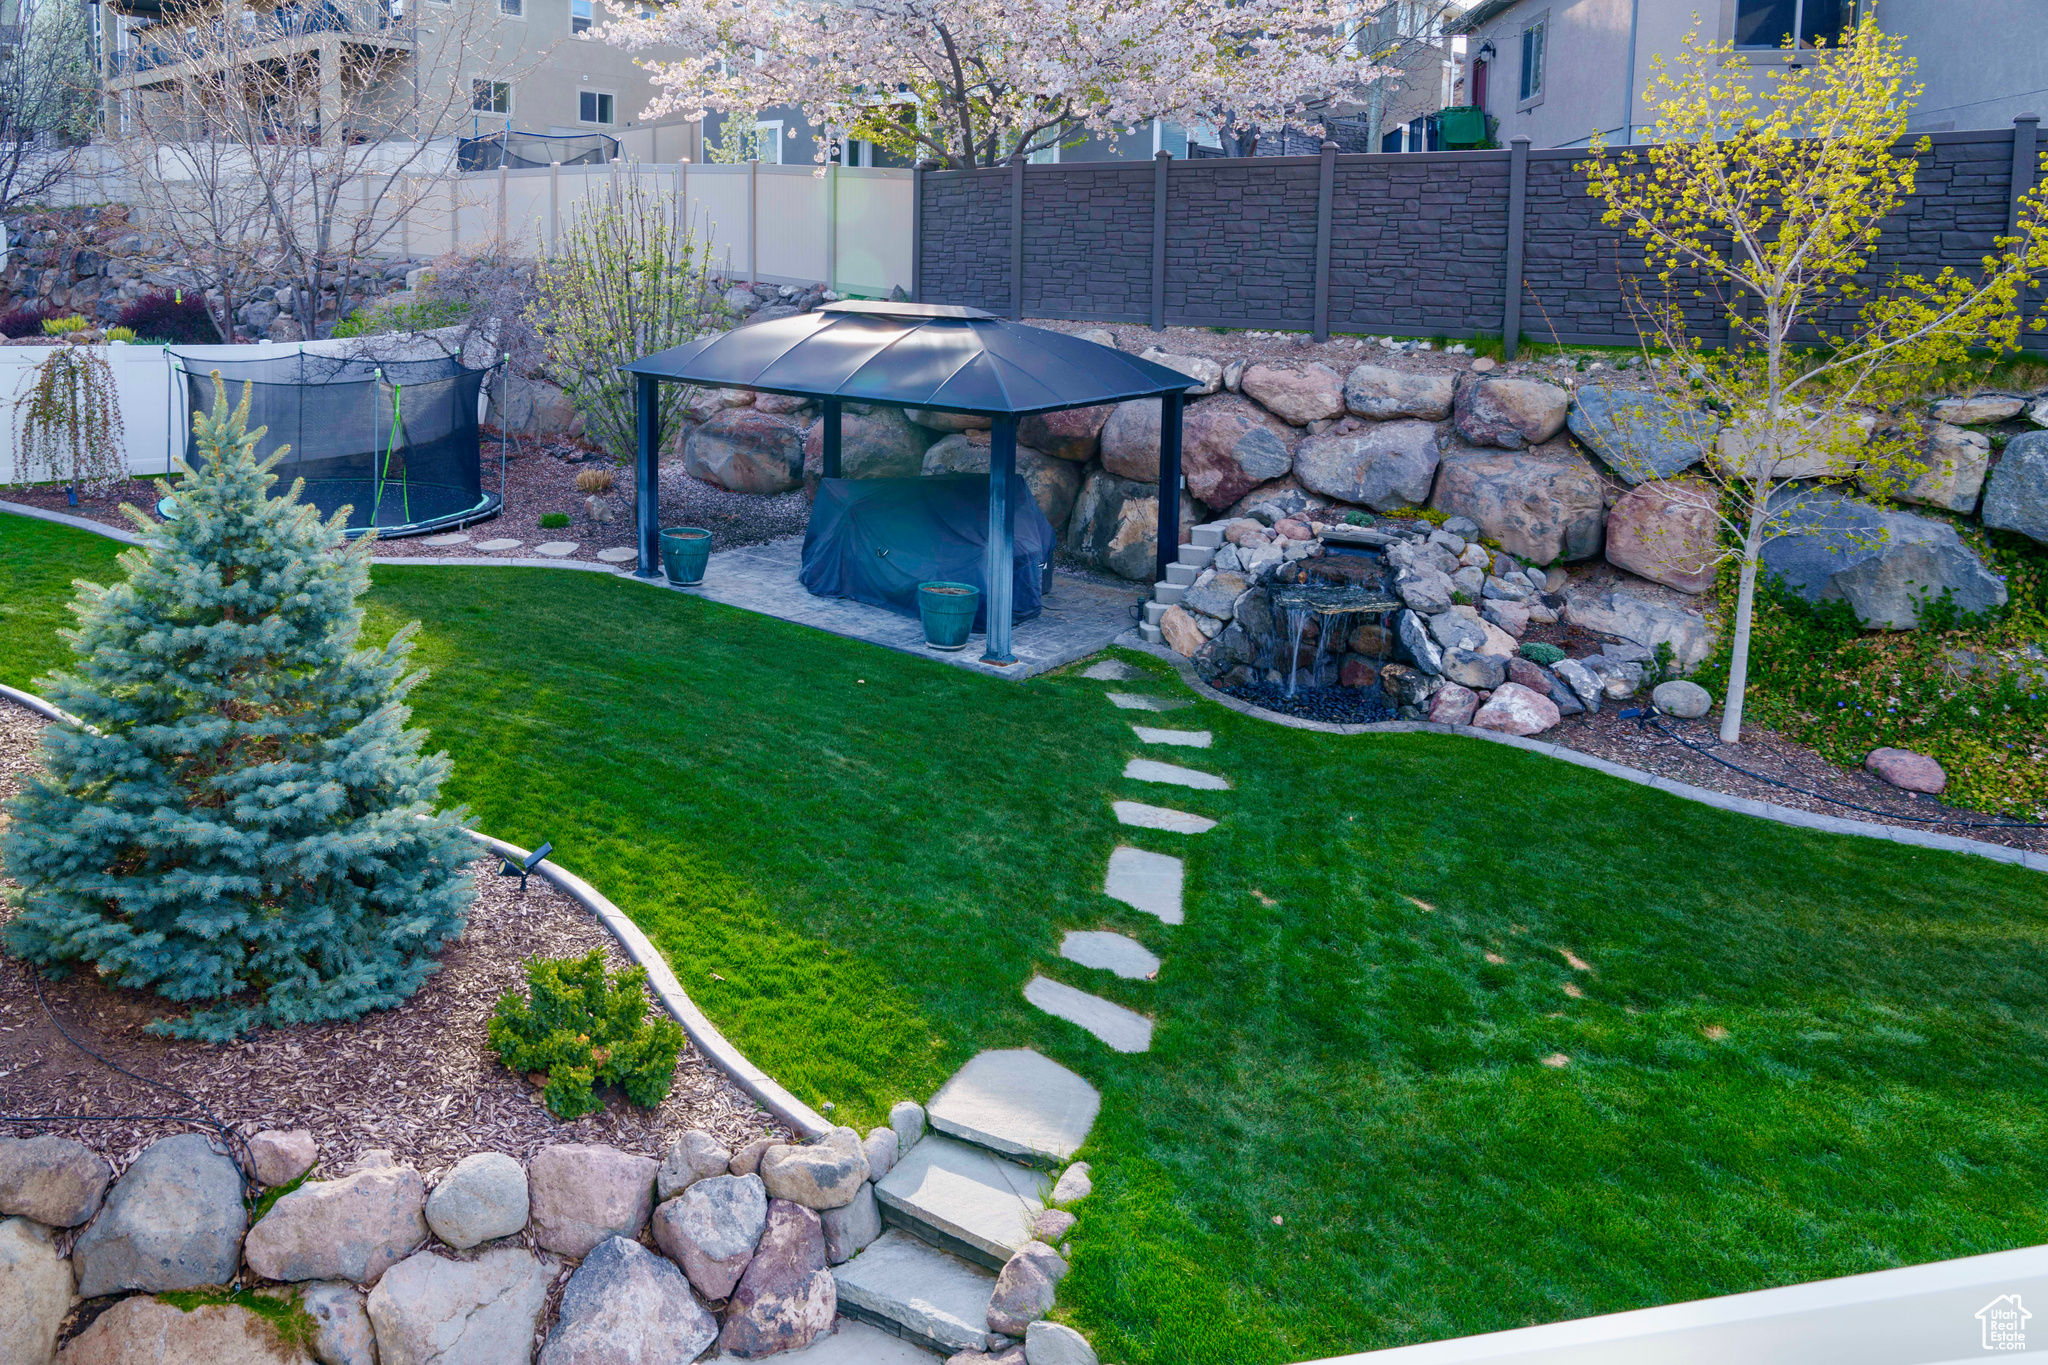 Fully landscape backyard with gazebo, waterfall and in-ground trampoline.